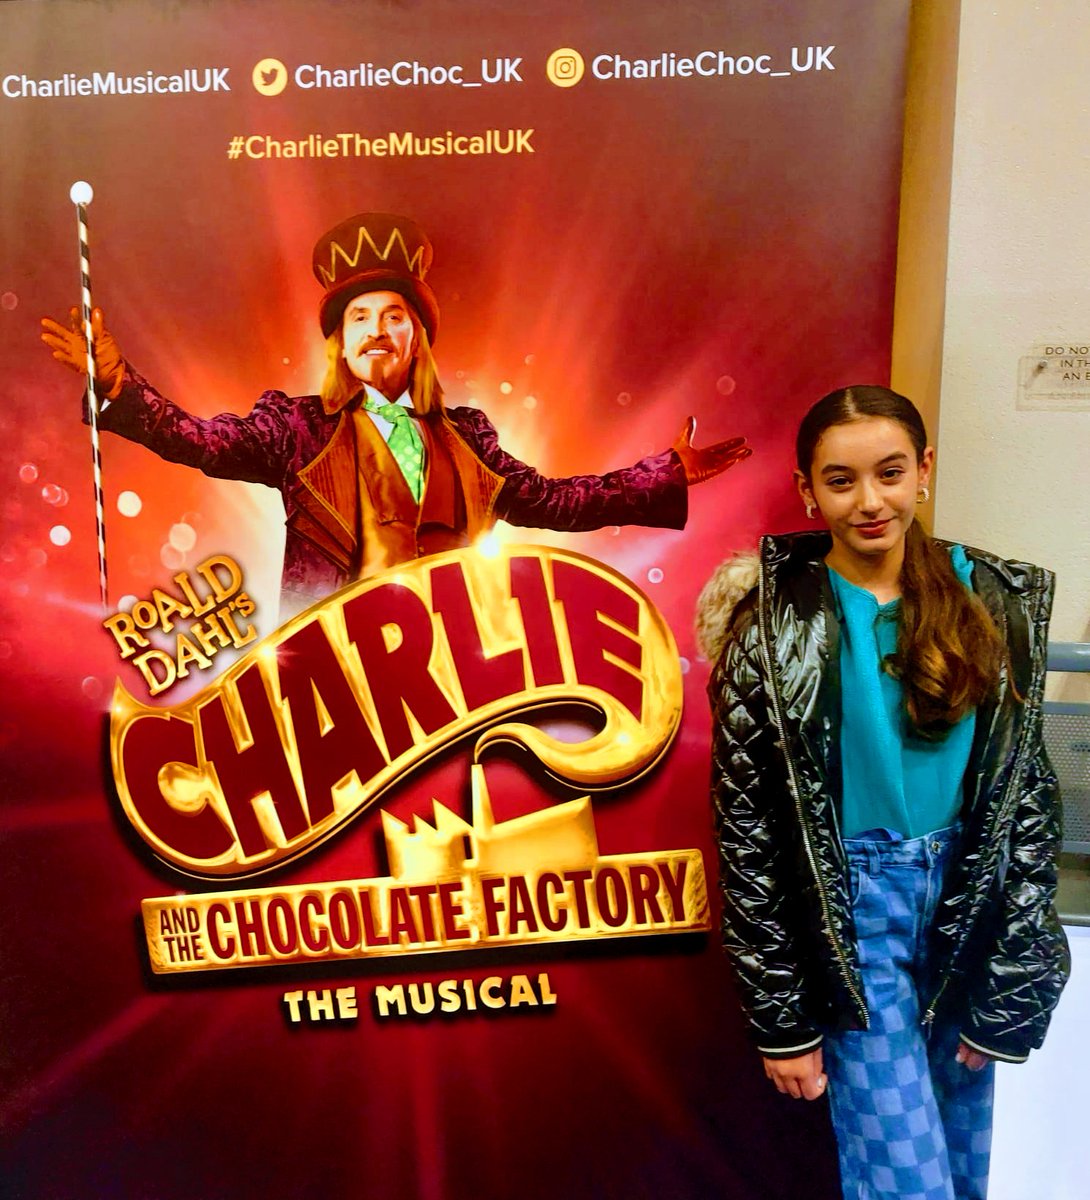 Had a Fantastic Experience ✨️✨️ watching The Charlie & Chocolate Factory @CharlieChoc_UK @LiverpoolEmpire 🎭